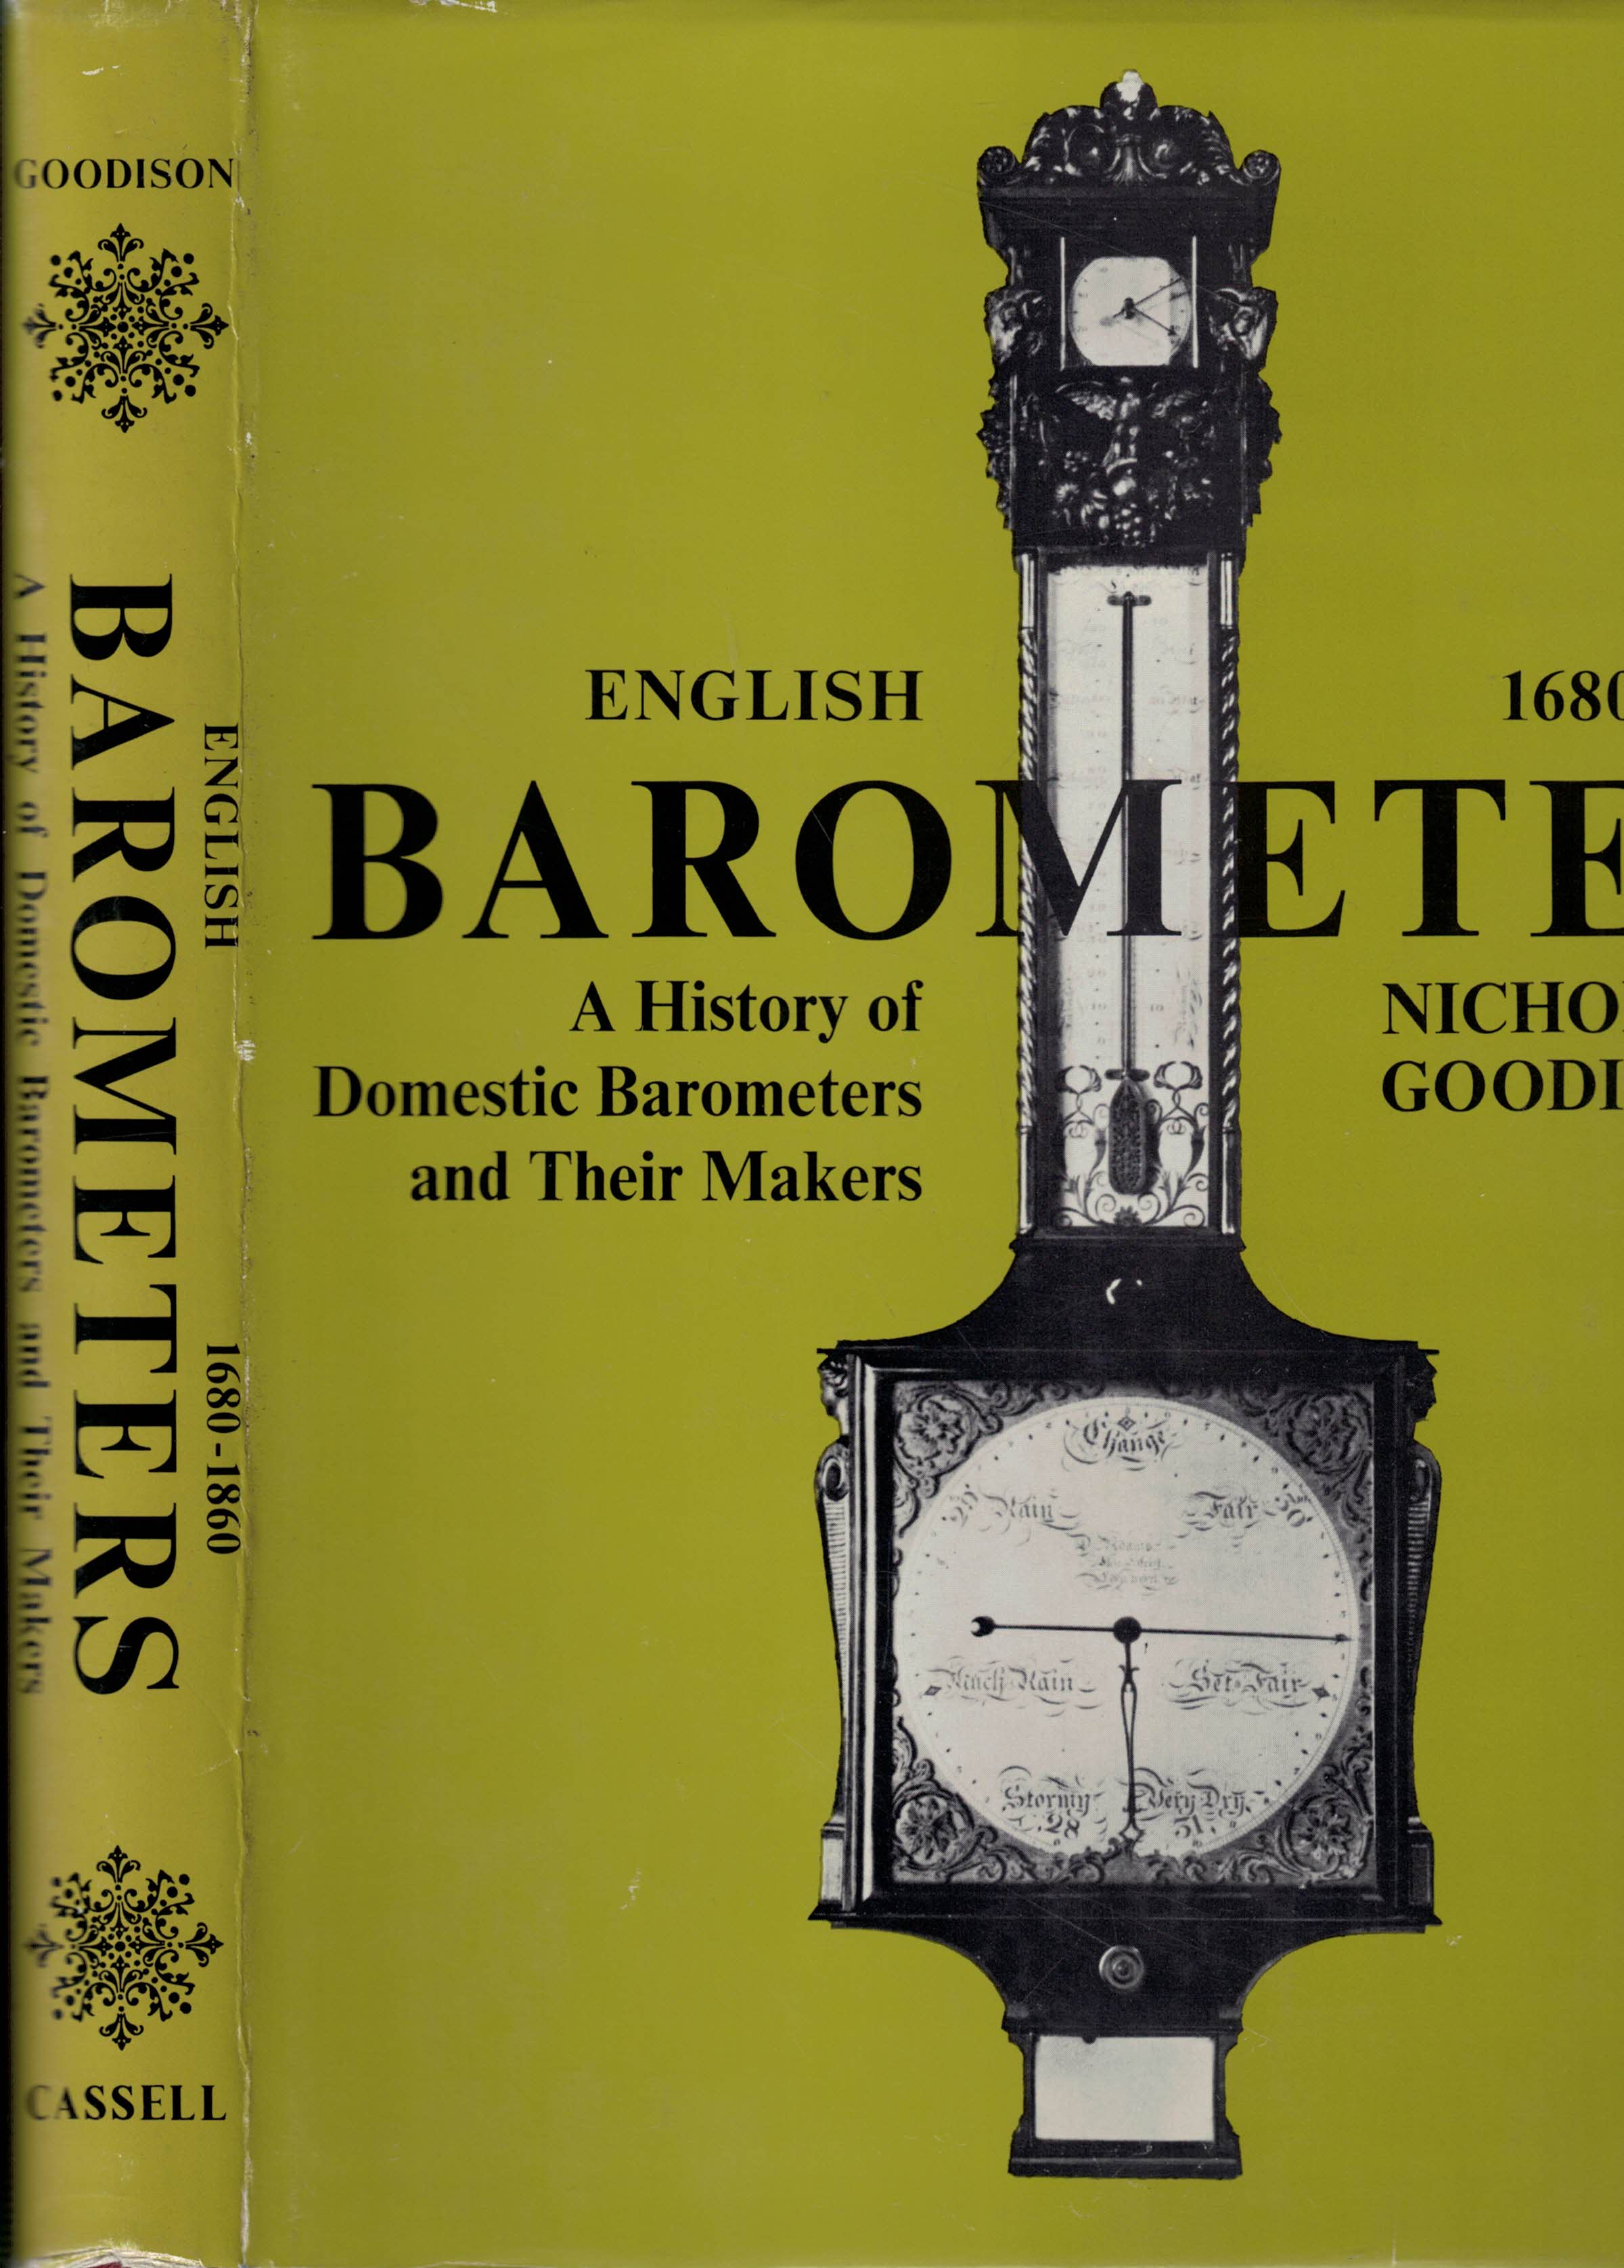 English Barometers 1680-1860. A History of Domestic Barometers and Their Makers - Goodison, Nicholas